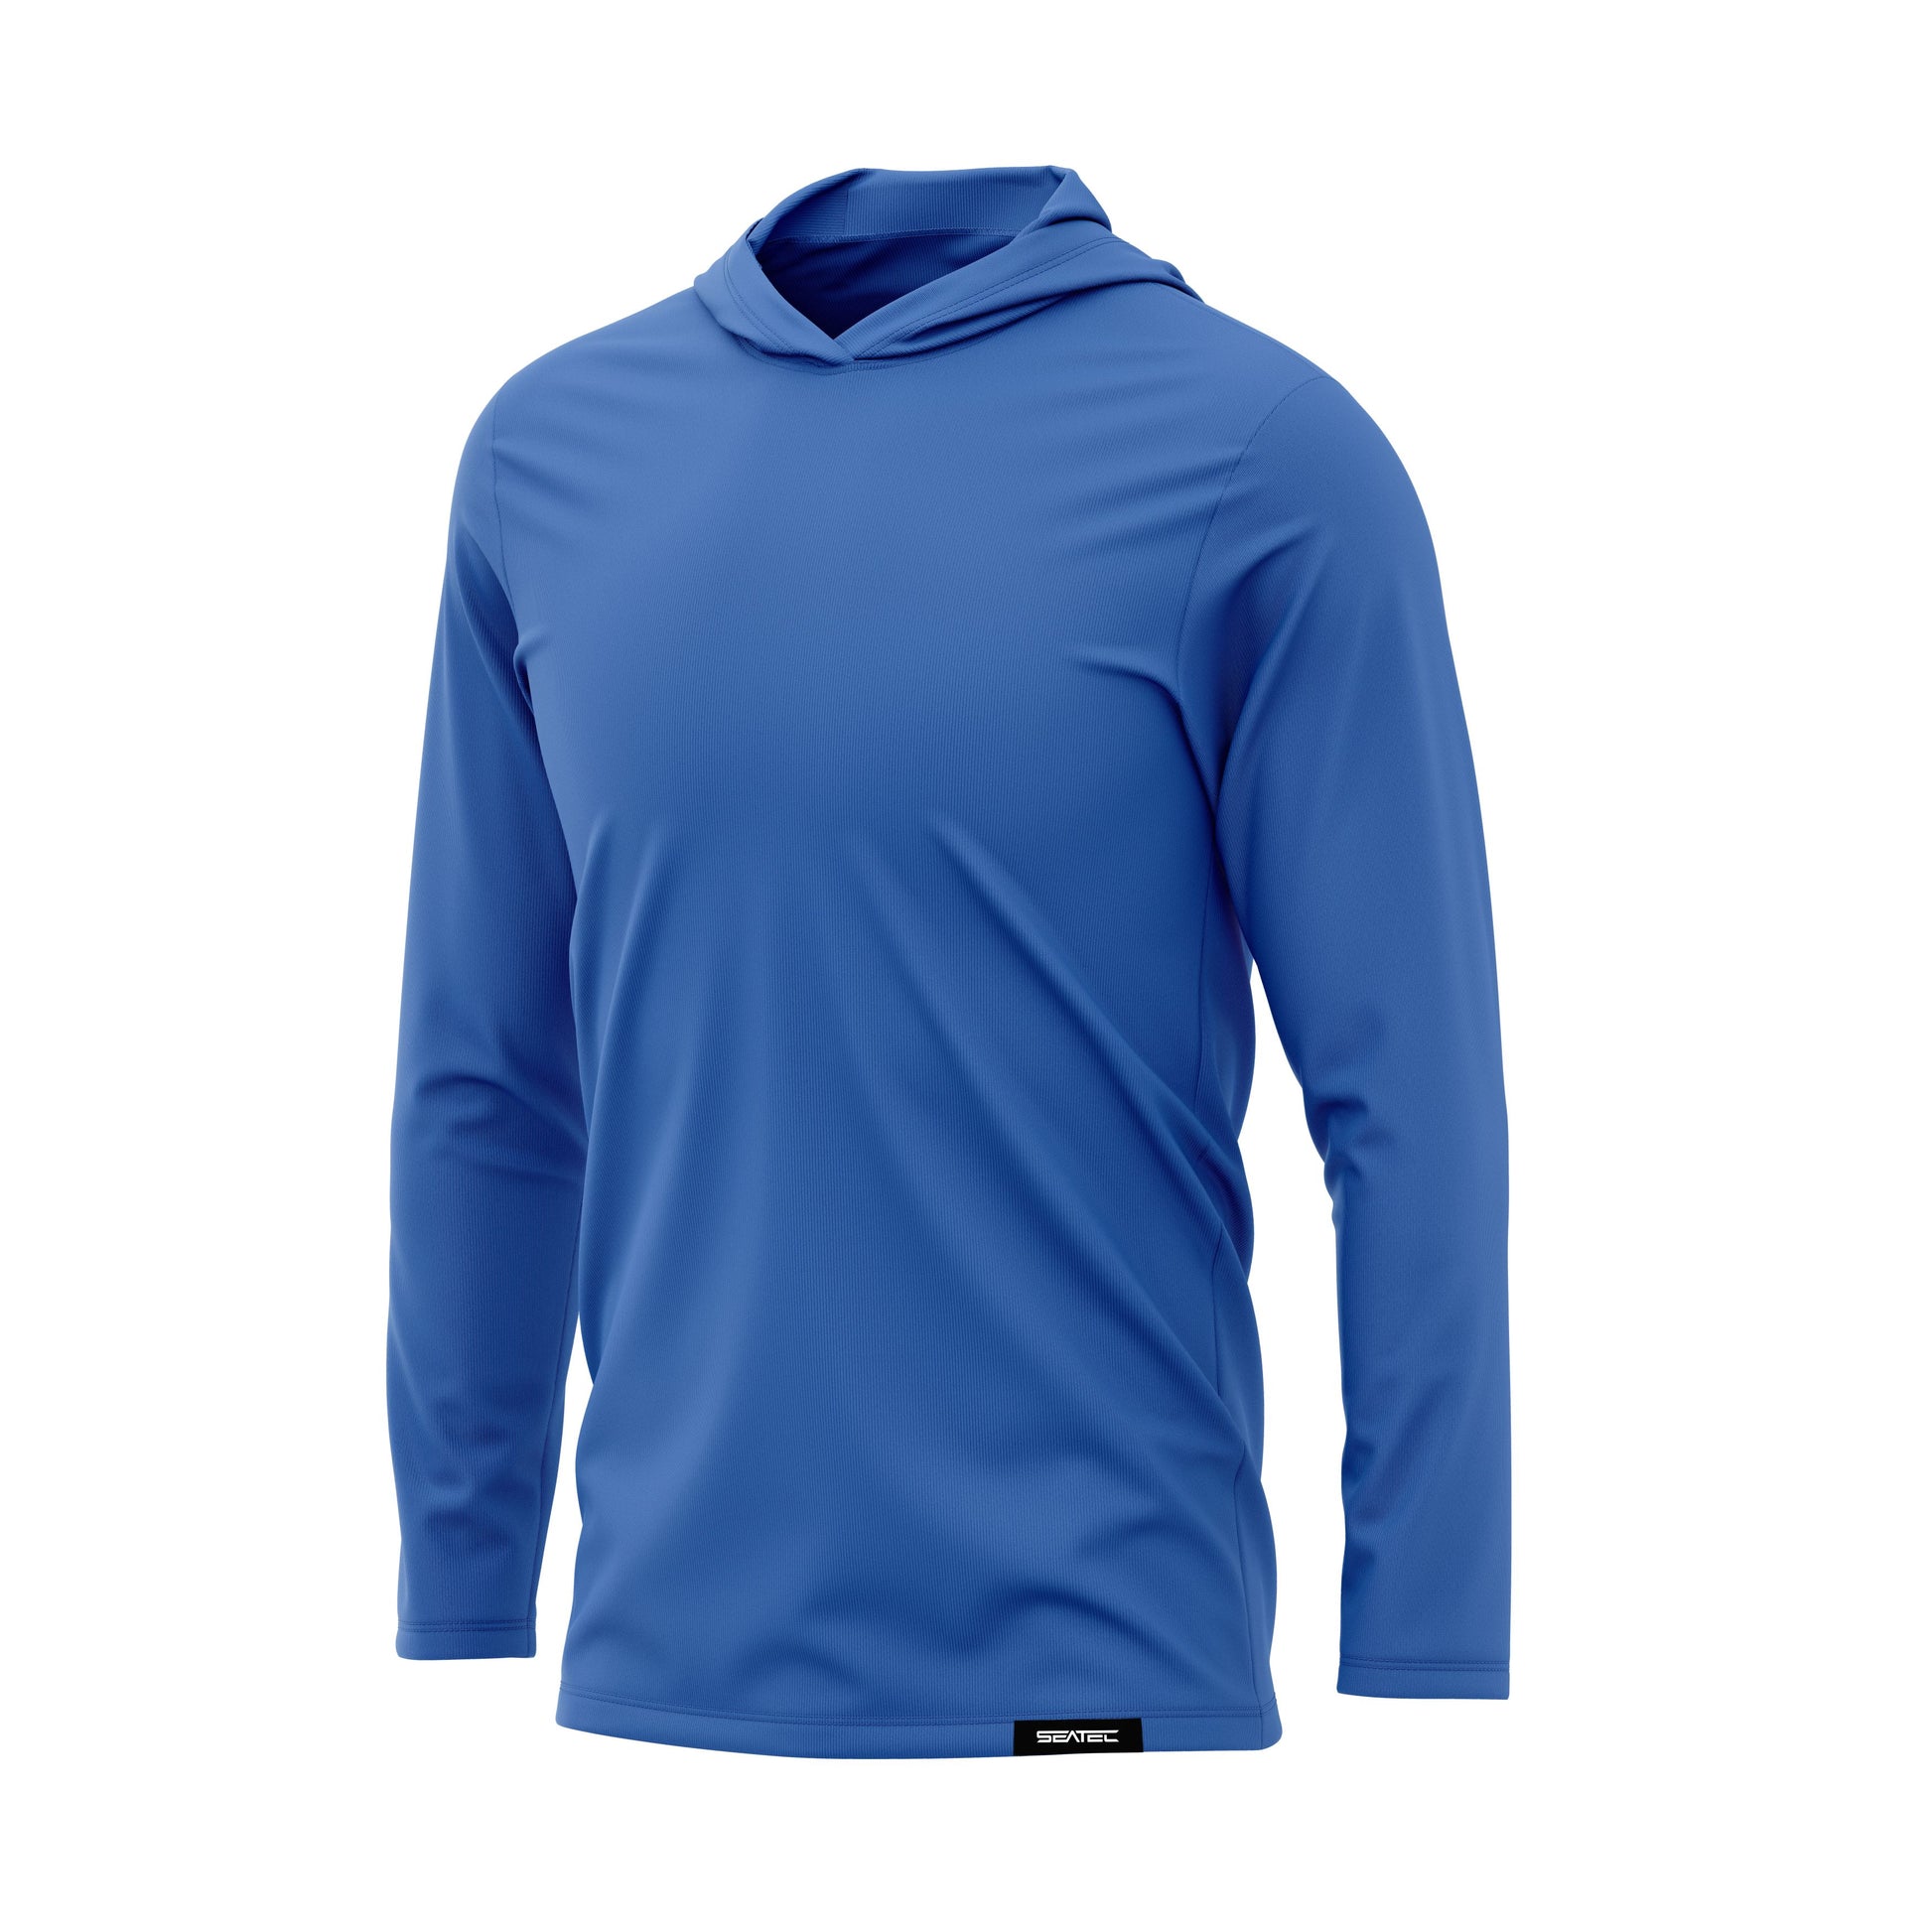 MEN'S ACTIVE | LARGO BLUE | LS HOODED – Seatec Outfitters